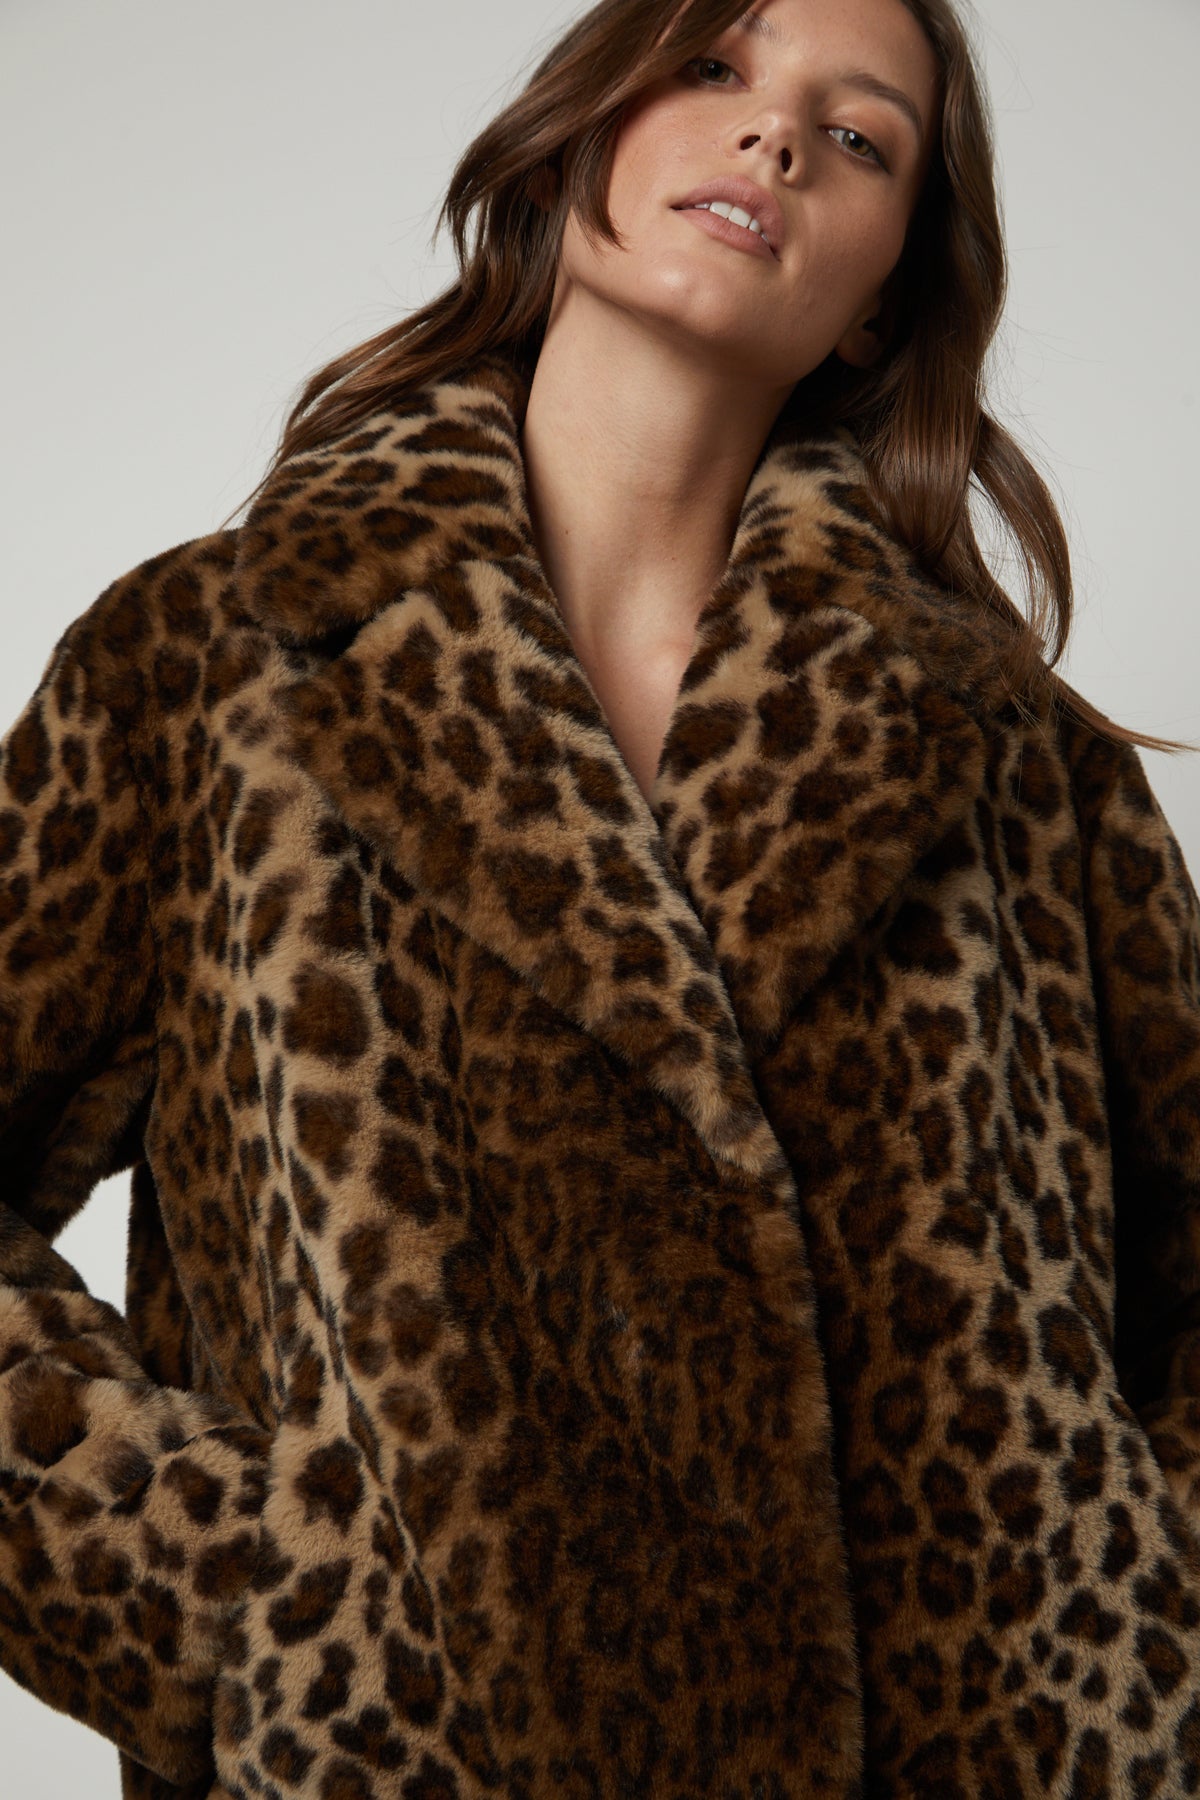 A woman wearing a AMANI LEOPARD LUX FAUX FUR JACKET by Velvet by Graham & Spencer.-26897679057089